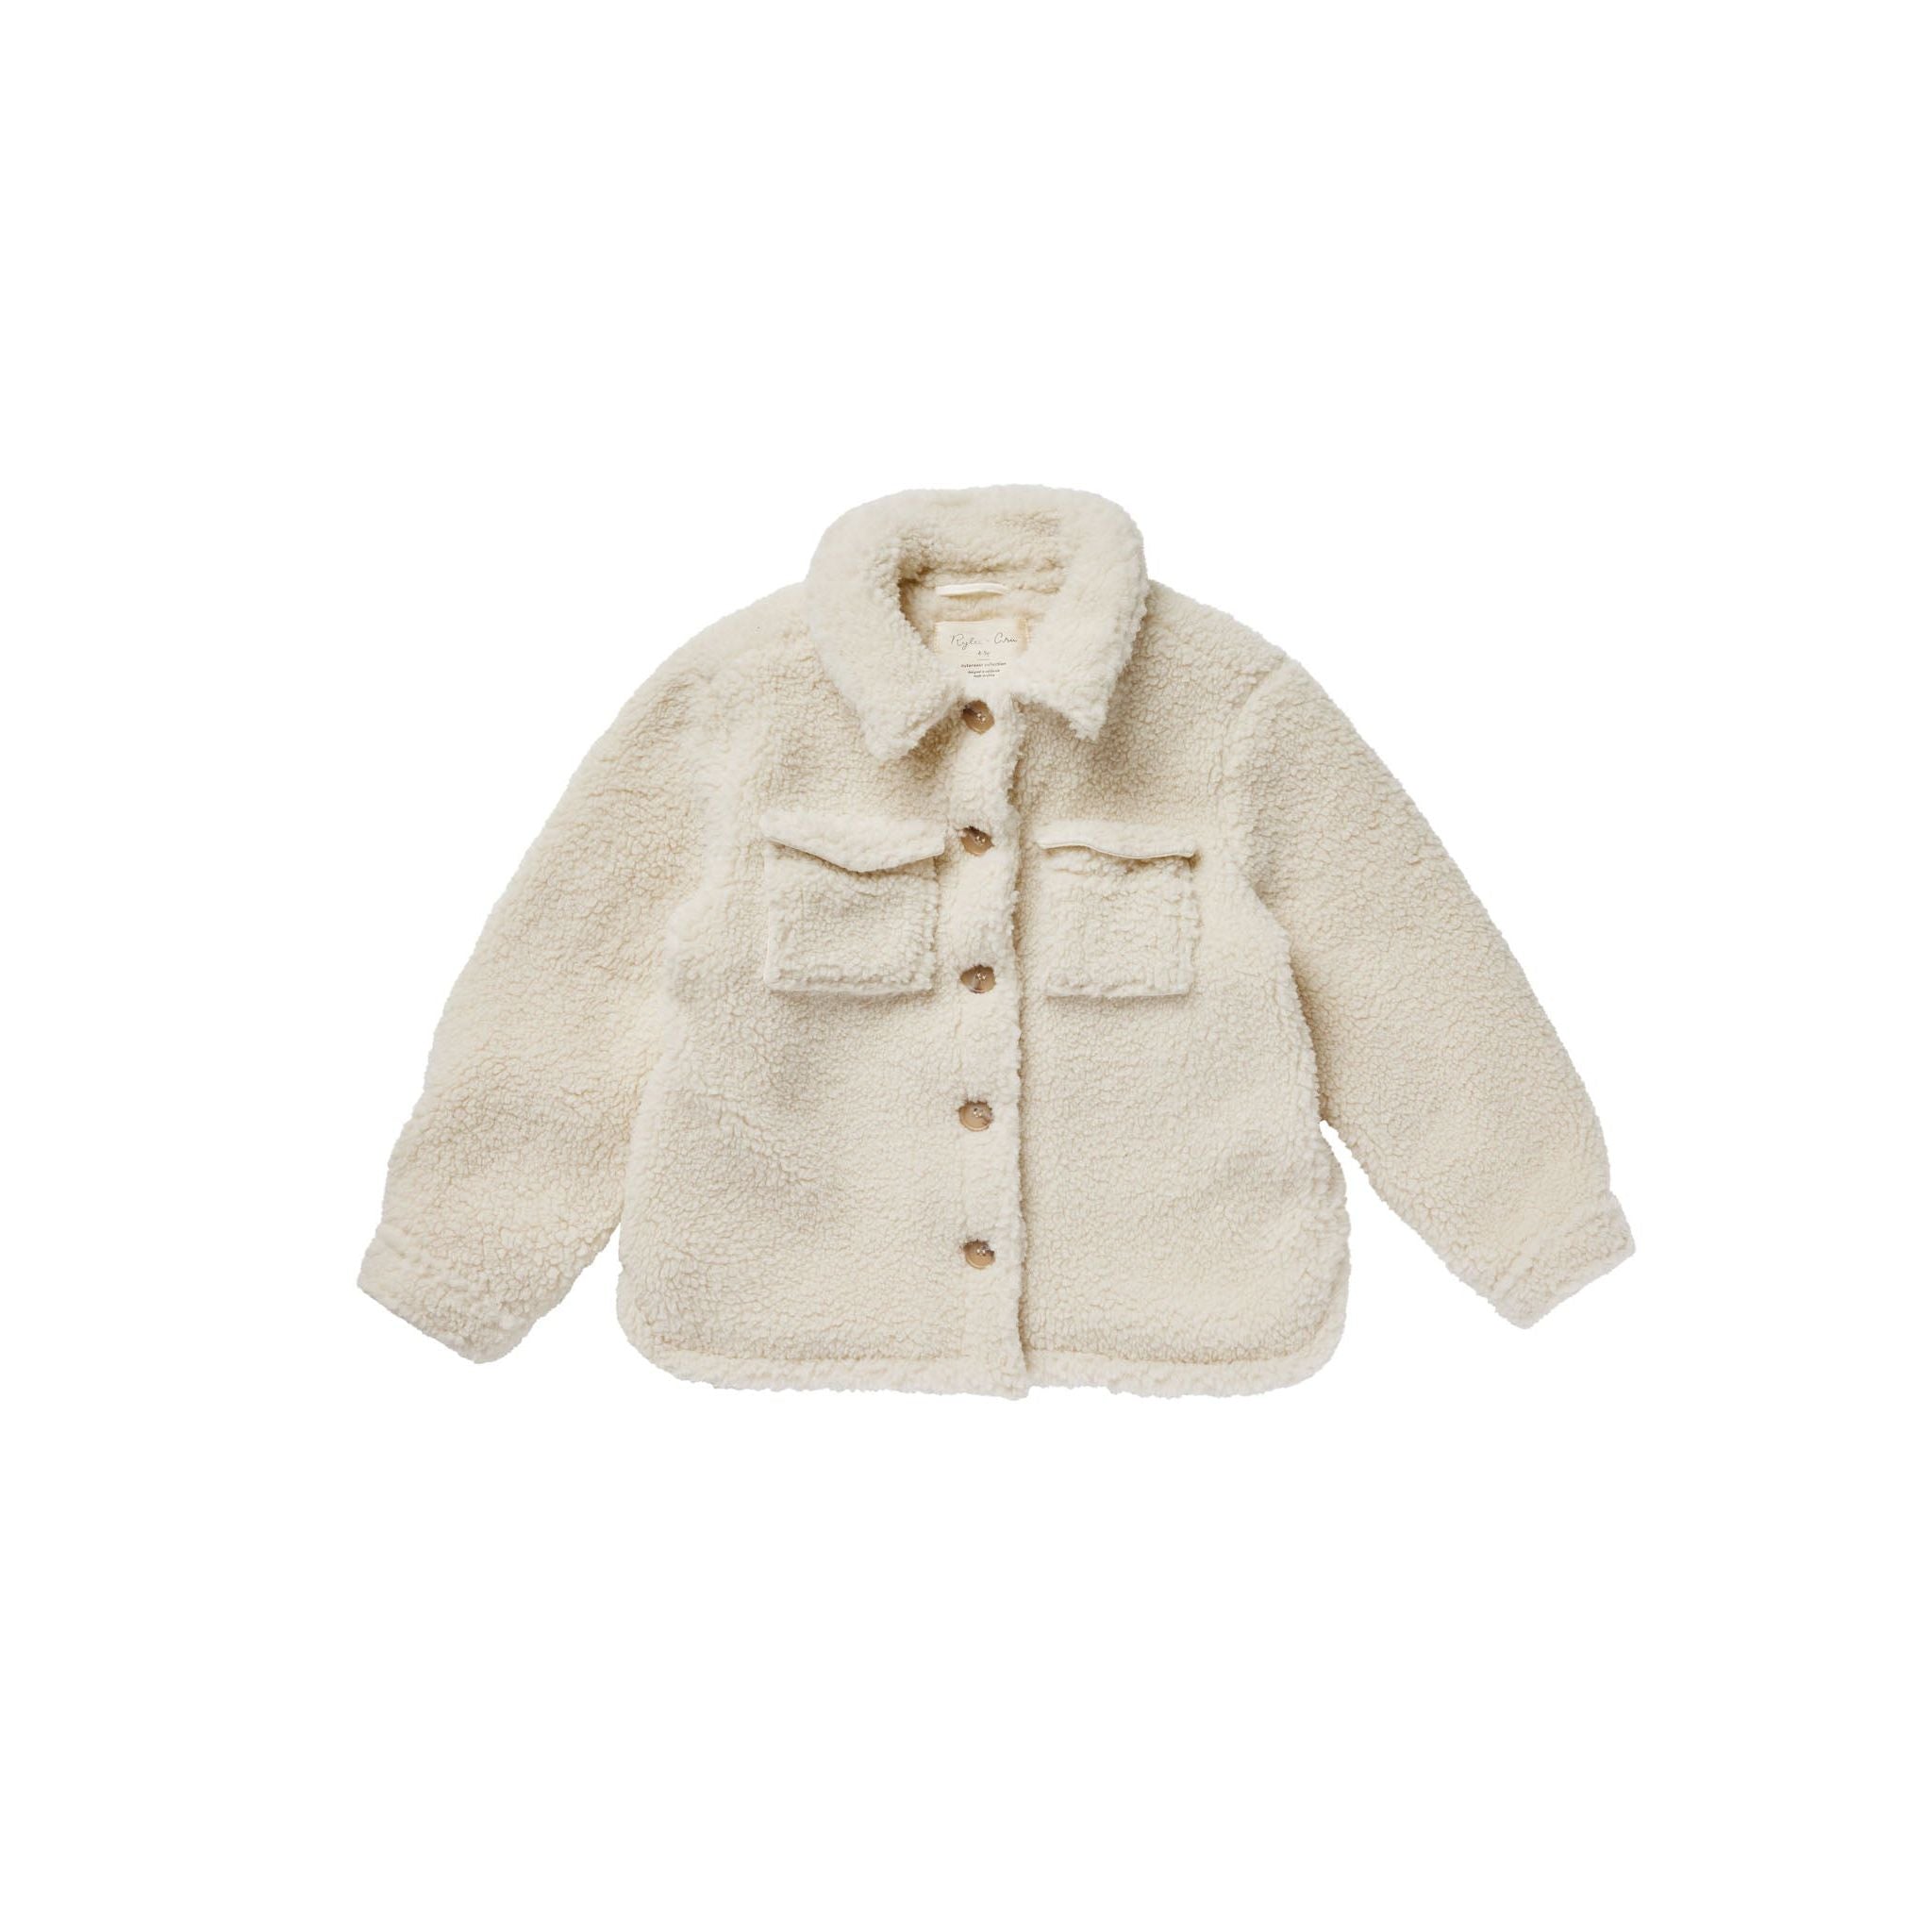 cream colored fleece chore coat with button up features and pockets